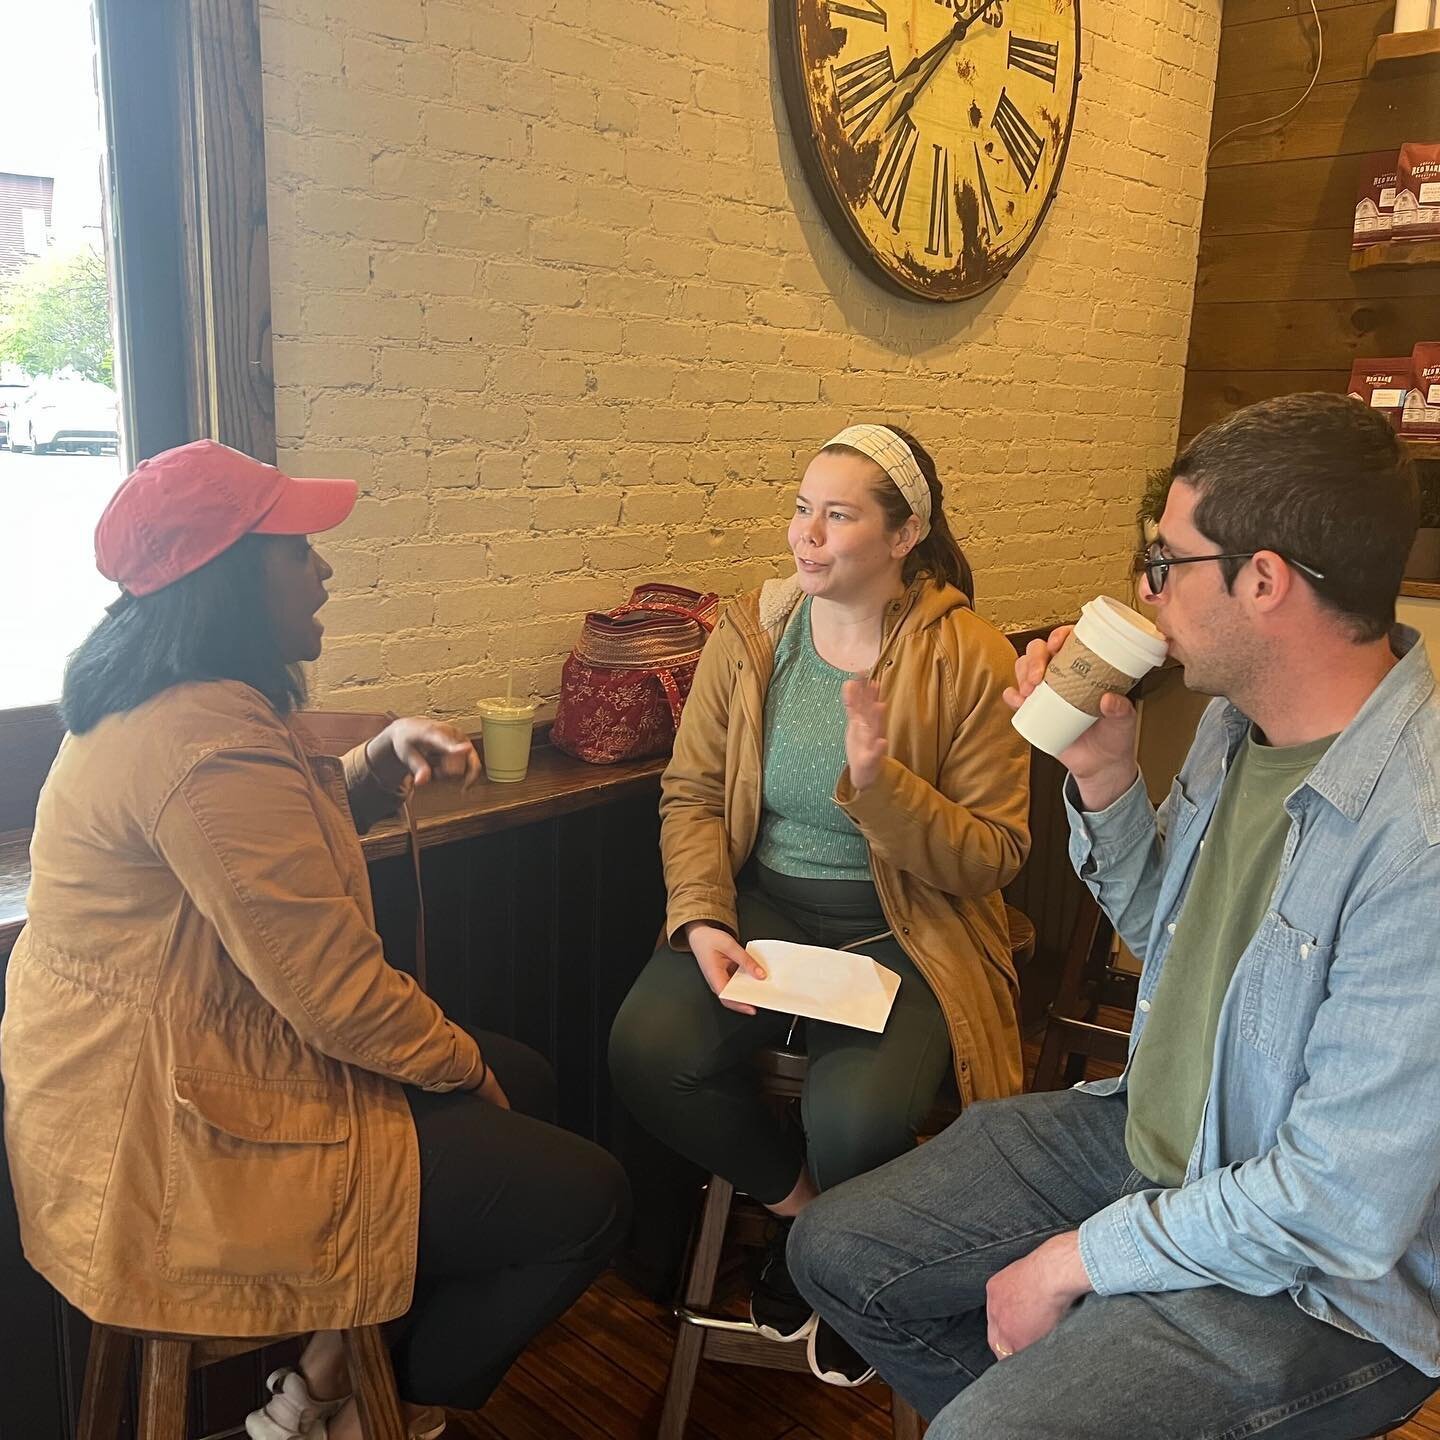 Thank you #Rozzie for chatting with me last Saturday during our office hours and thank you to the @greentcoffeeshop for hosting us! If you couldn't make it last weekend, no worries - I'll be in #WestRoxbury this Saturday from 12:30 to 2:30 p.m. at @e